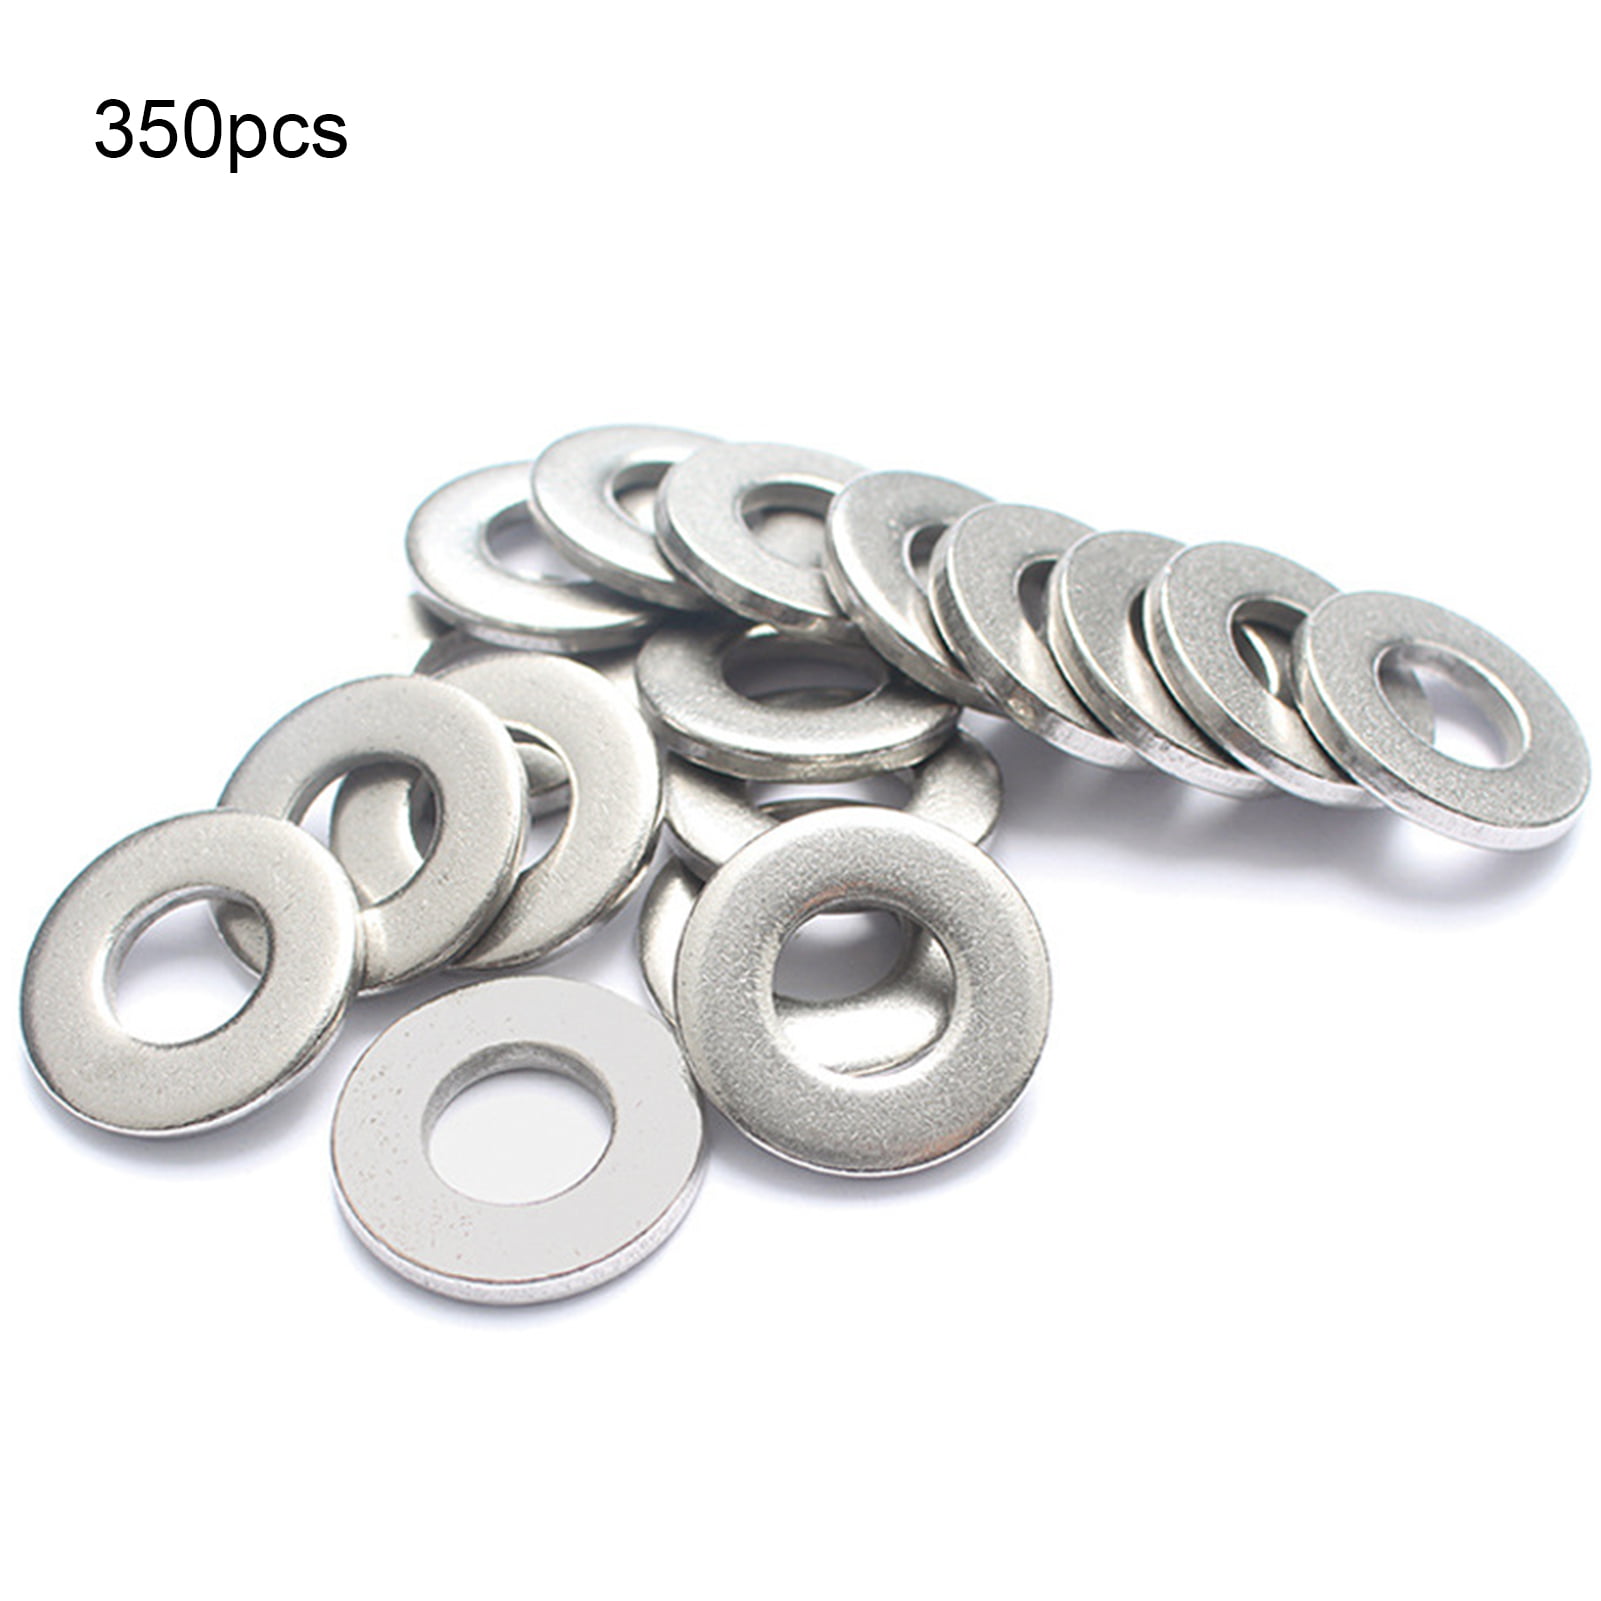 U disk A2 Stainless Steel M5 DIN125 Body Washer Small Washers 